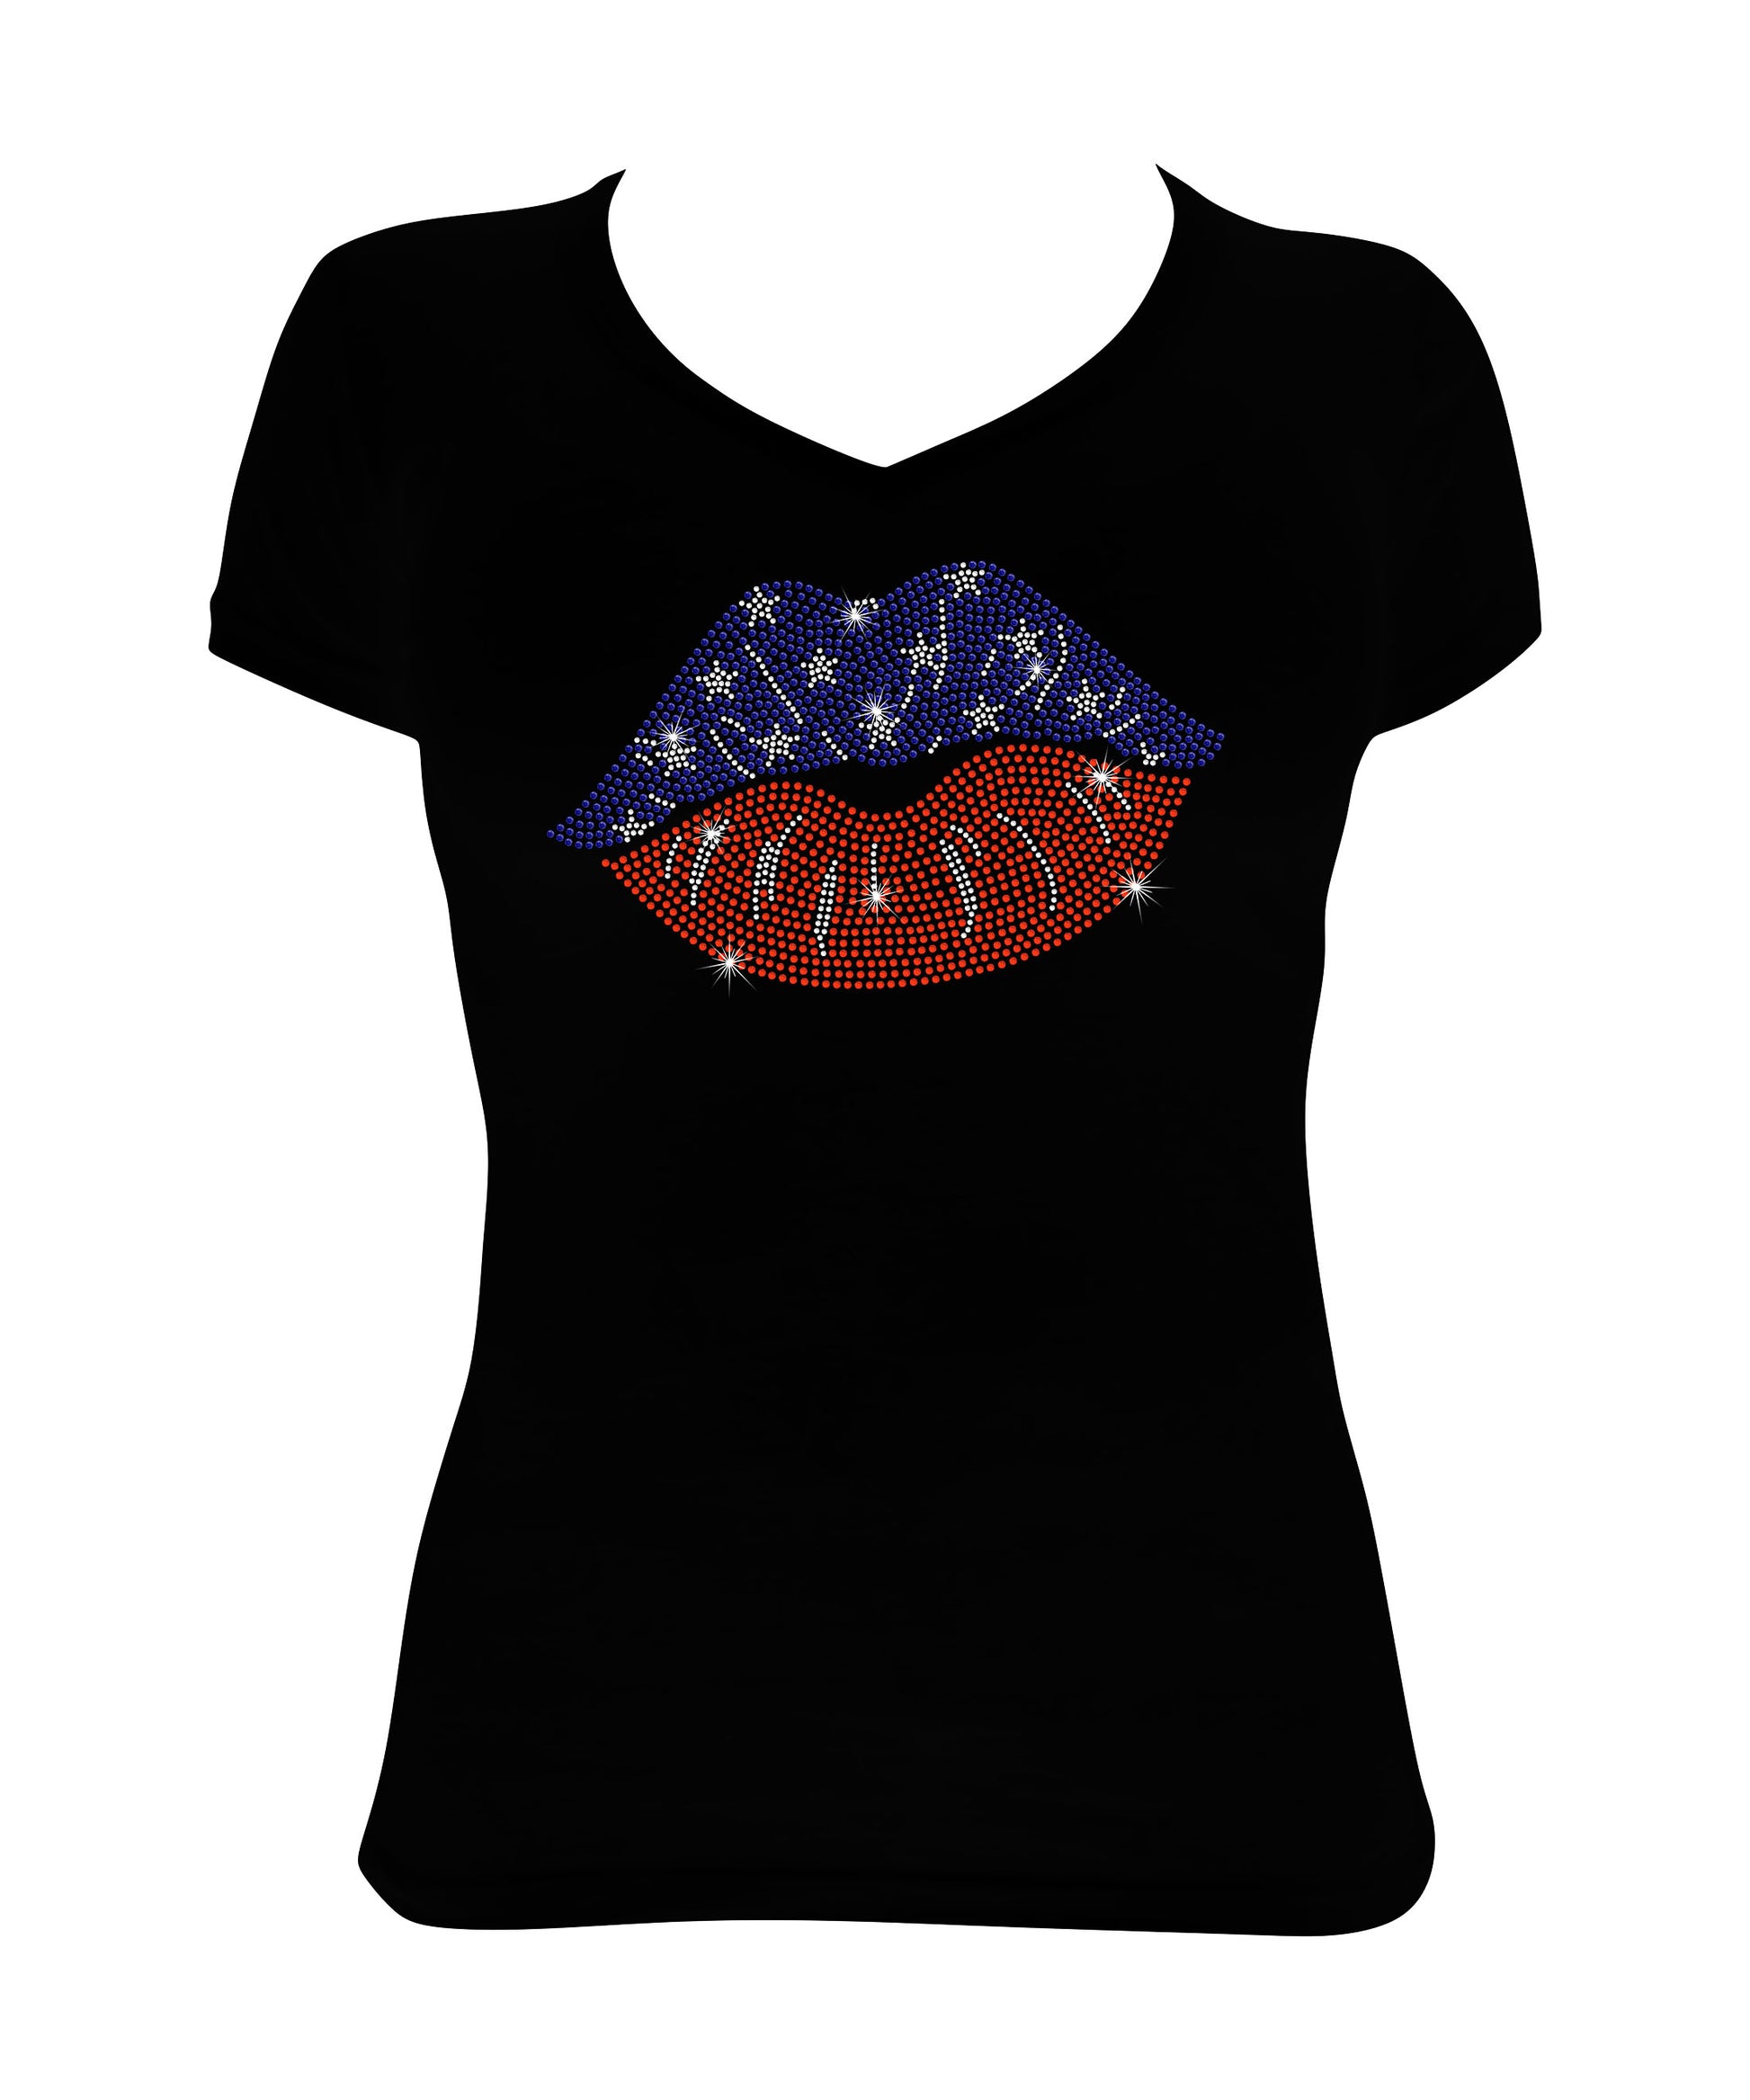 4th of July Lips - in Red, White & Blue, Patriotic Shirt, 4th of July Shirt